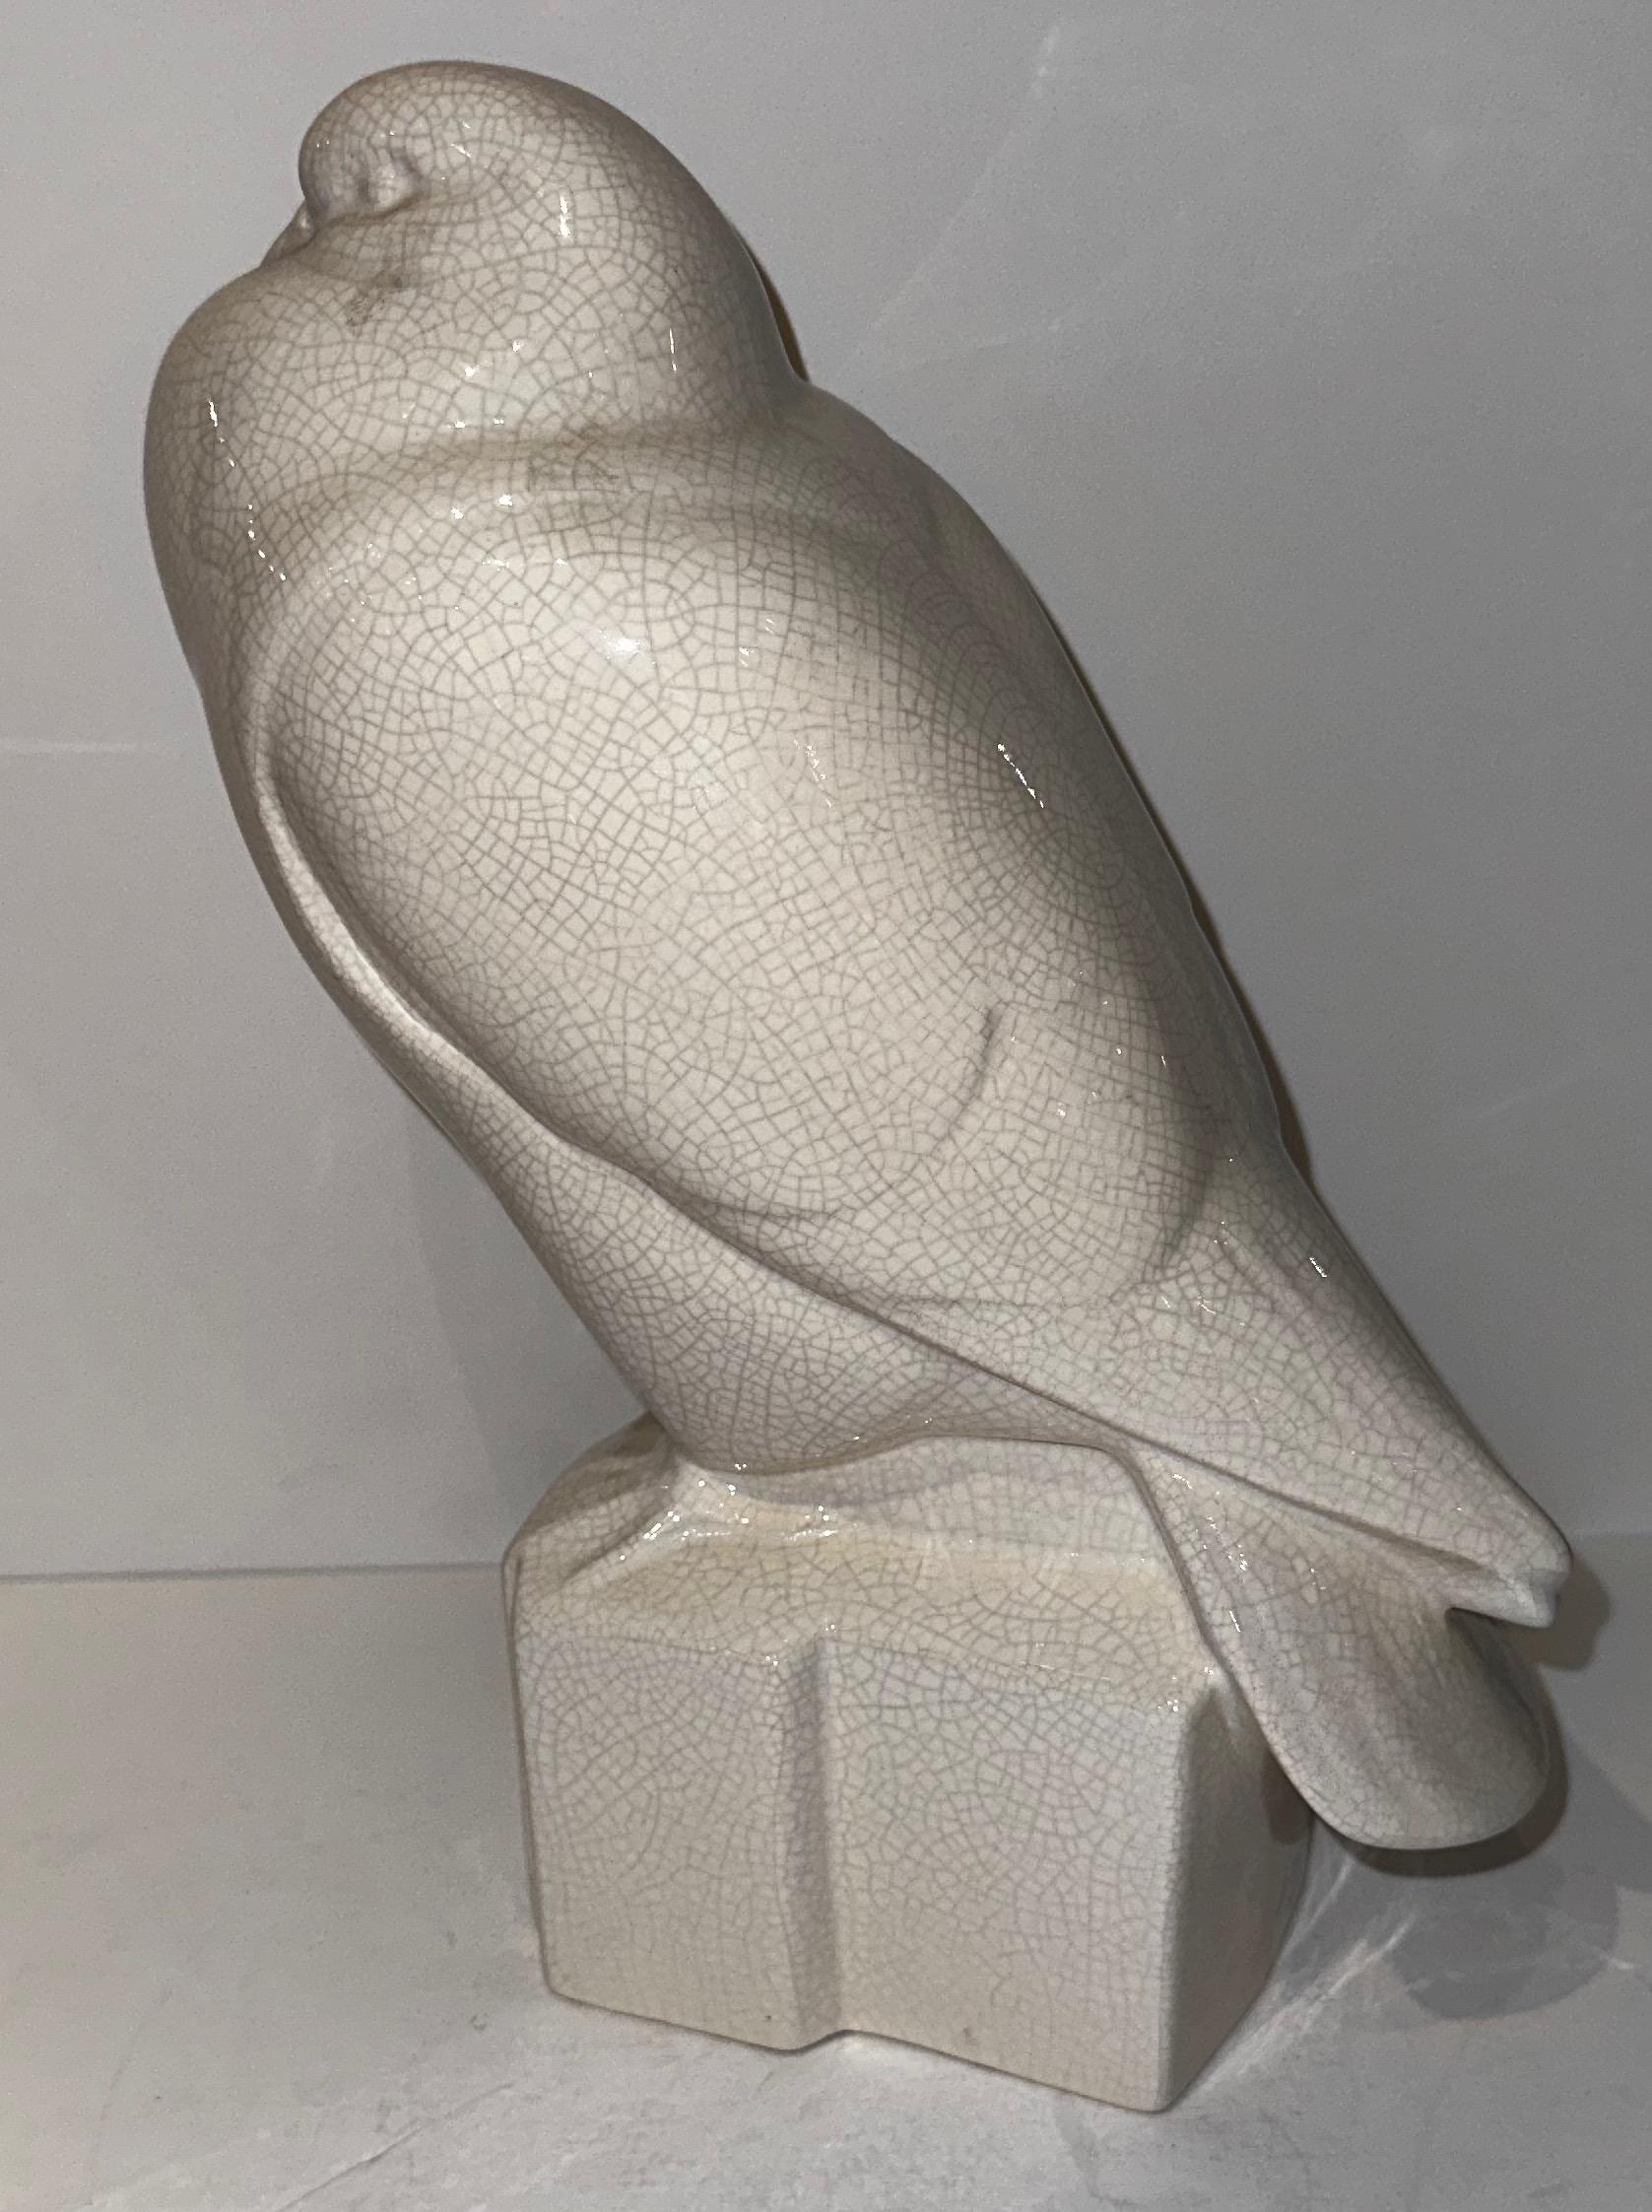 Henri Guingot Saint Clement France White Crackle Ceramic Dove, circa 1930s crackle glaze craqueles. This piece like many of the great ceramic series of animals. The white crackle ceramic dove made by Henri Guingot during the 1930s is an example of